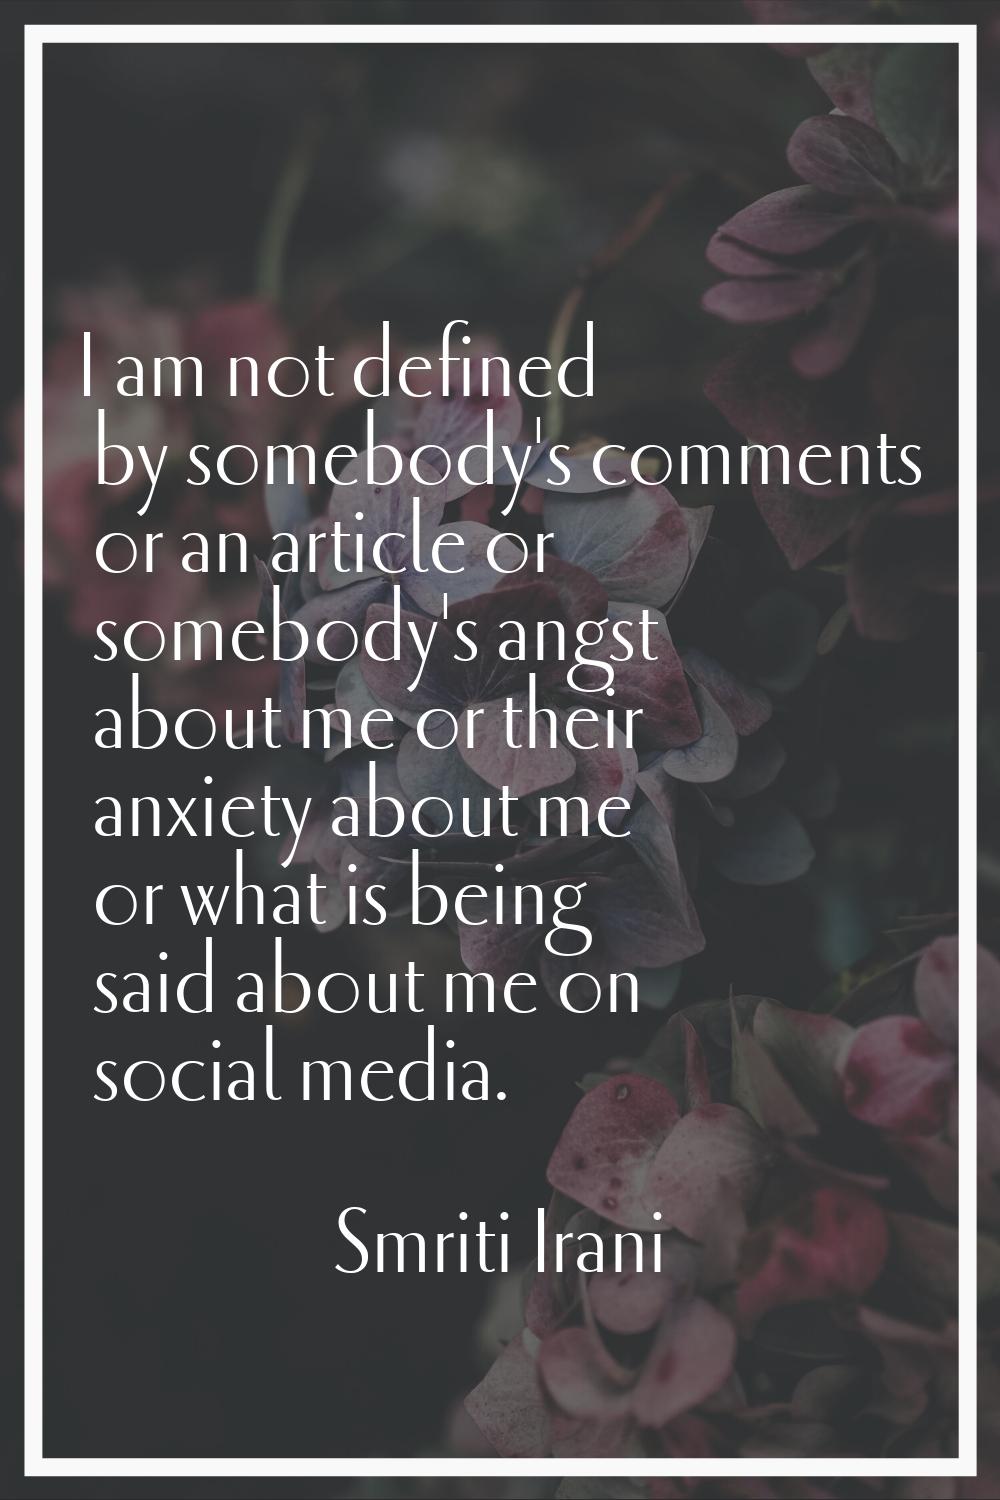 I am not defined by somebody's comments or an article or somebody's angst about me or their anxiety